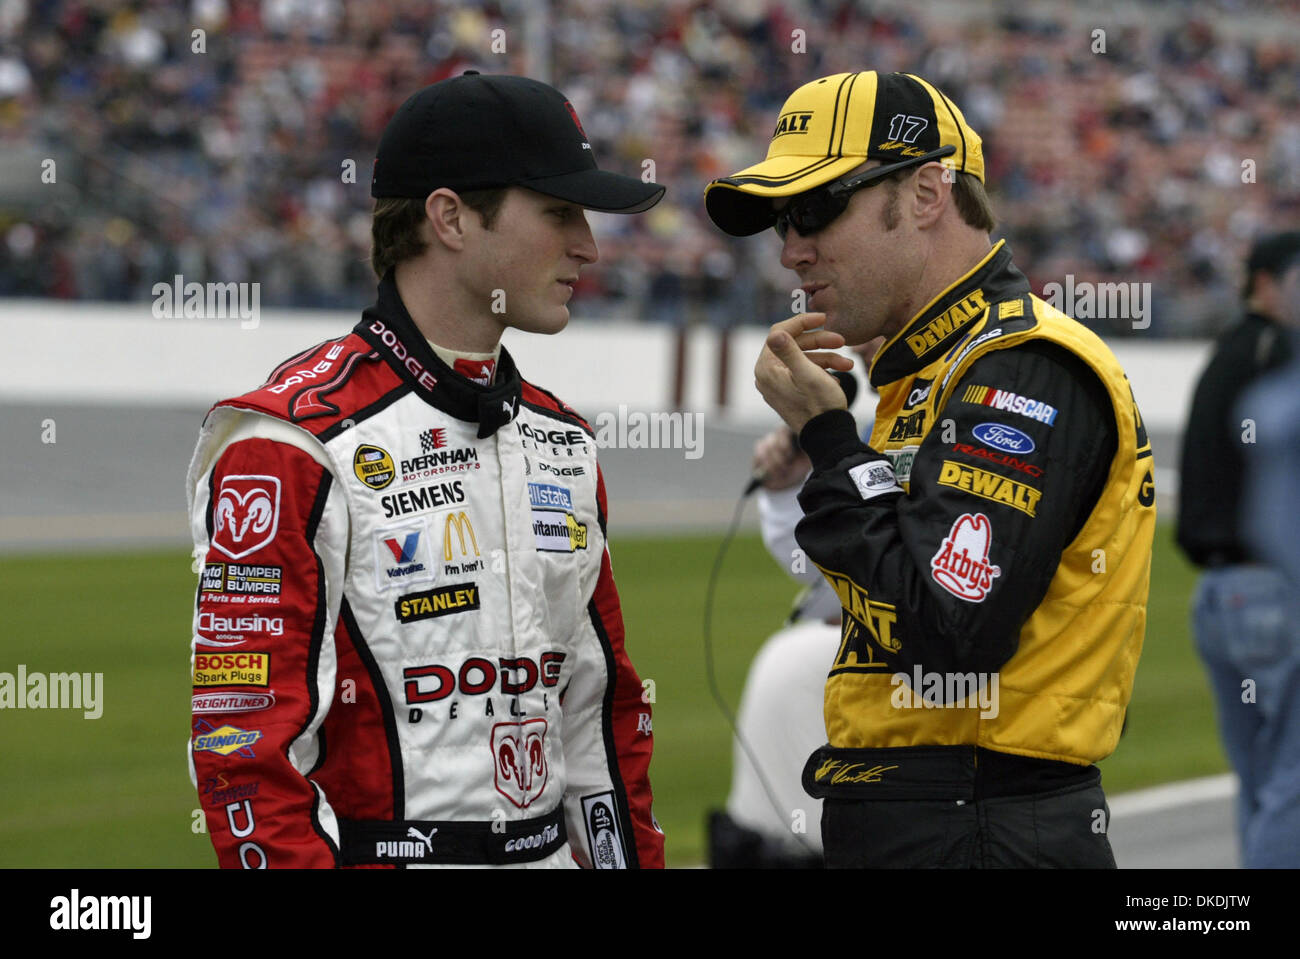 Feb 15, 2007 - Daytona Beach, FL, USA - KASEY KAHNE (driver of the #9 car), left, and MATT KENSETH (driver of the #17 car) chat before the start of the Nextel Cup Series Gatorade Dual 150 races at Daytona International Speedway in Daytona Beach, Florida on Wednesday, February 15, 2007.  Both drivers' crew chiefs were suspended by NASCAR. (Credit Image: © Gregg Pachkowski/Angel Pach Stock Photo